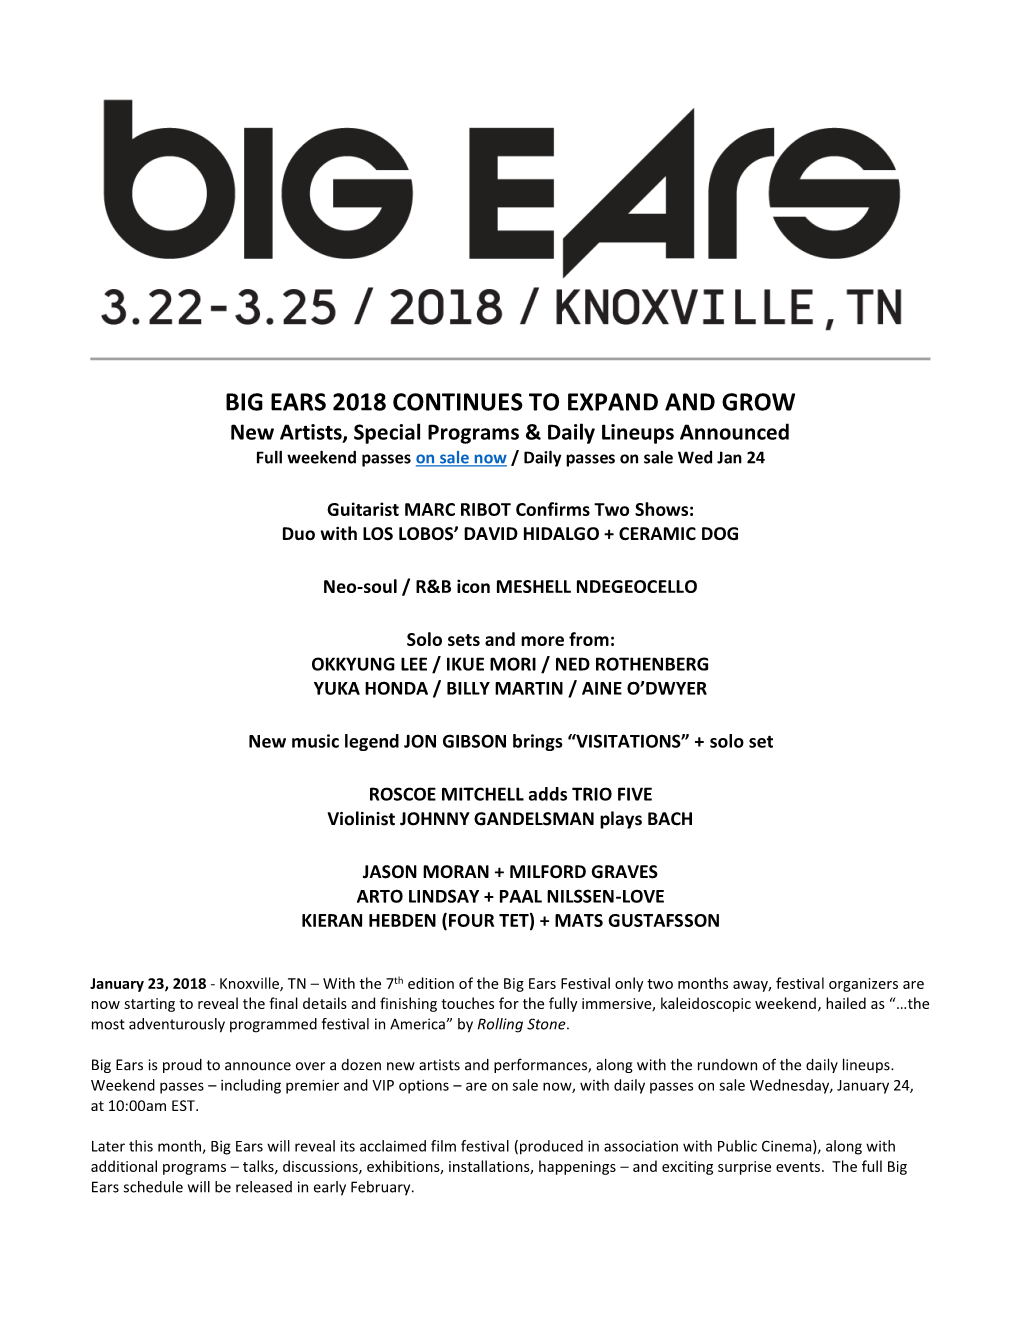 BIG EARS 2018 CONTINUES to EXPAND and GROW New Artists, Special Programs & Daily Lineups Announced Full Weekend Passes on Sale Now / Daily Passes on Sale Wed Jan 24